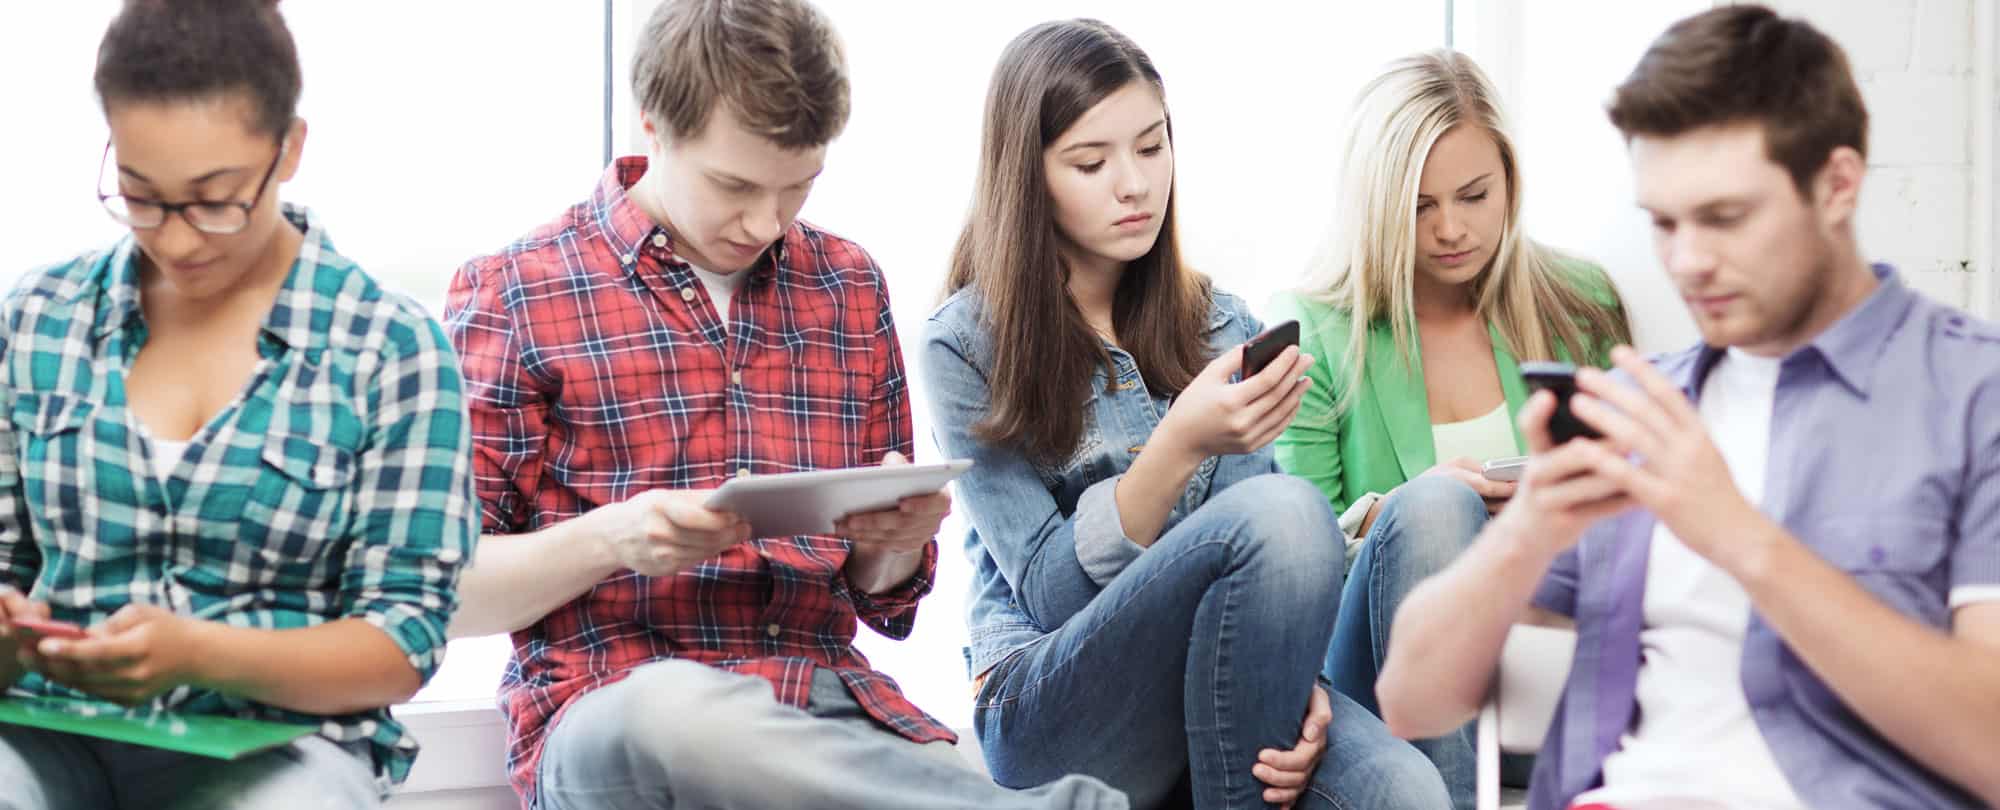 Teenagers Using Phone to- Contact us